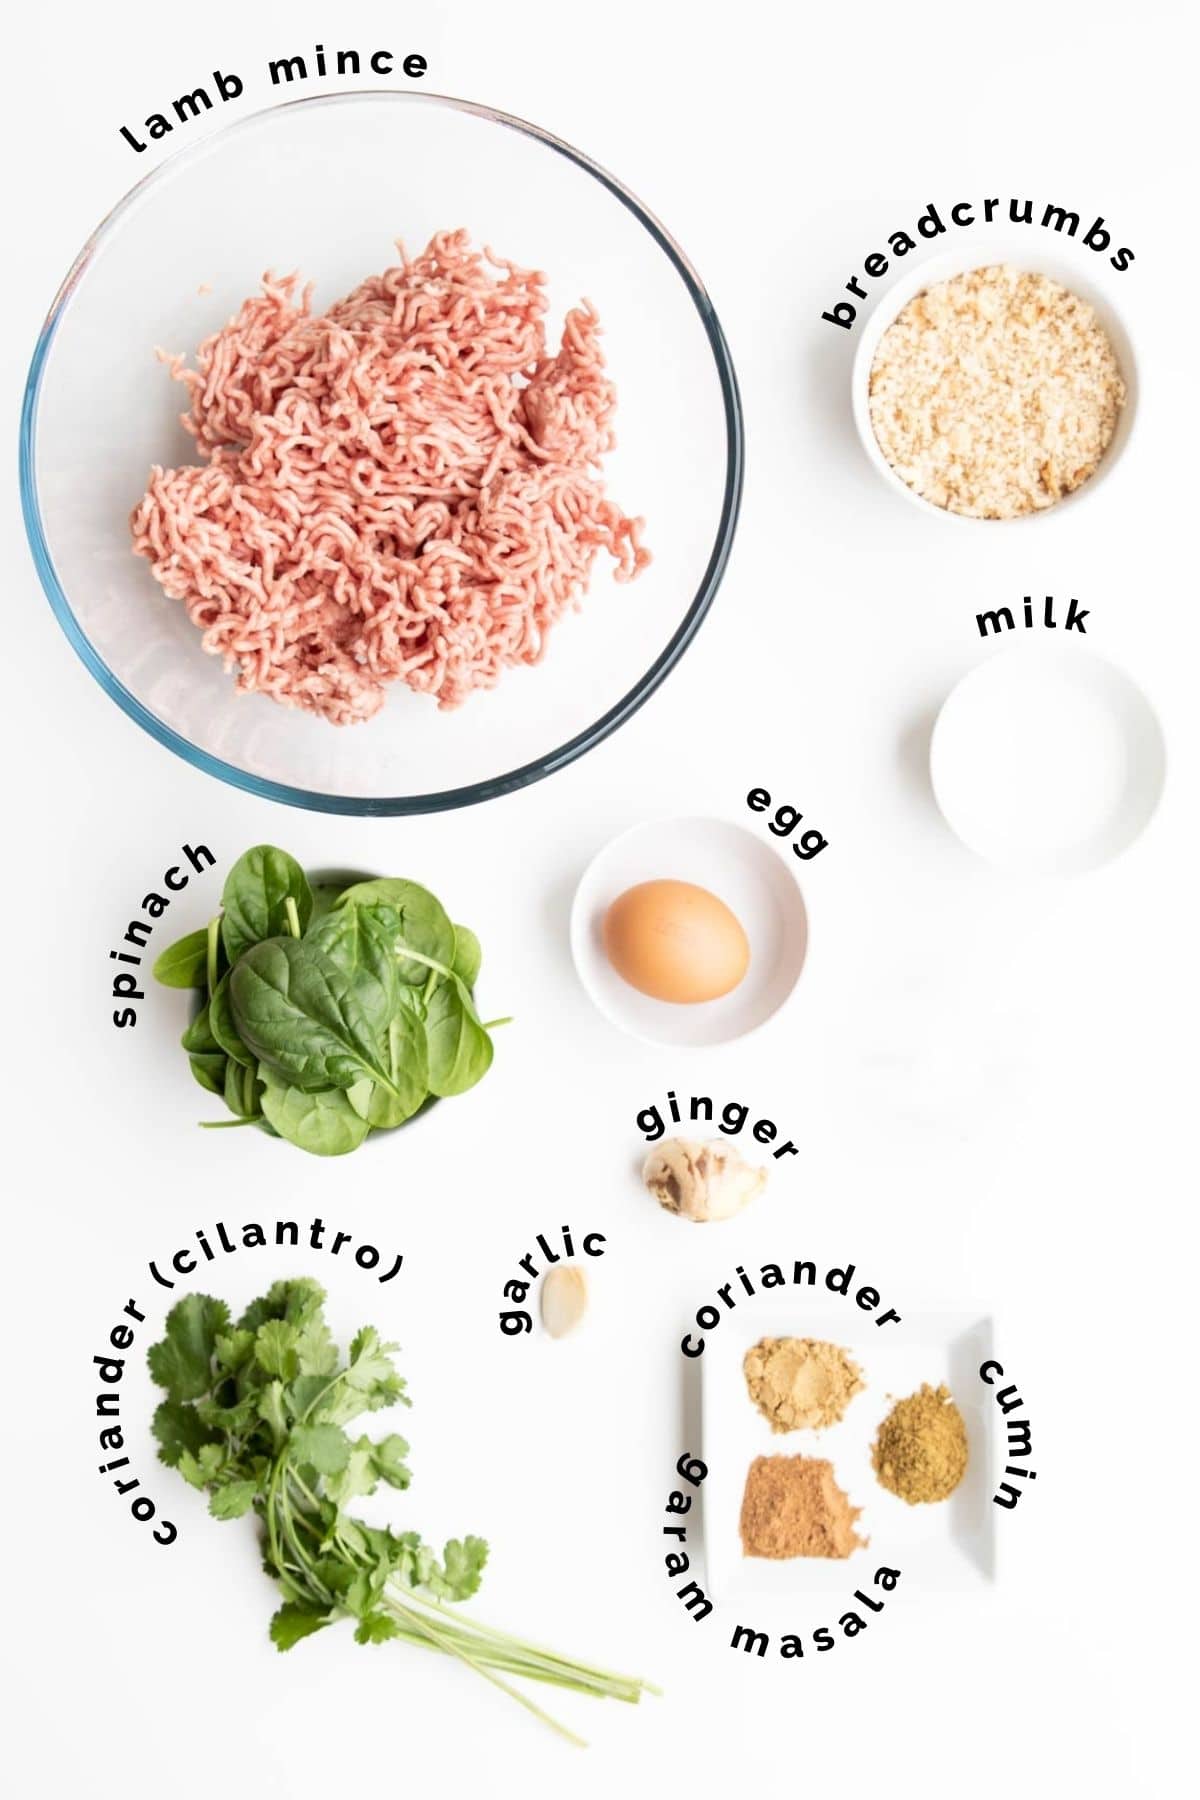 Flat Lay of Ingredients for Spiced Meatballs (Labelled).